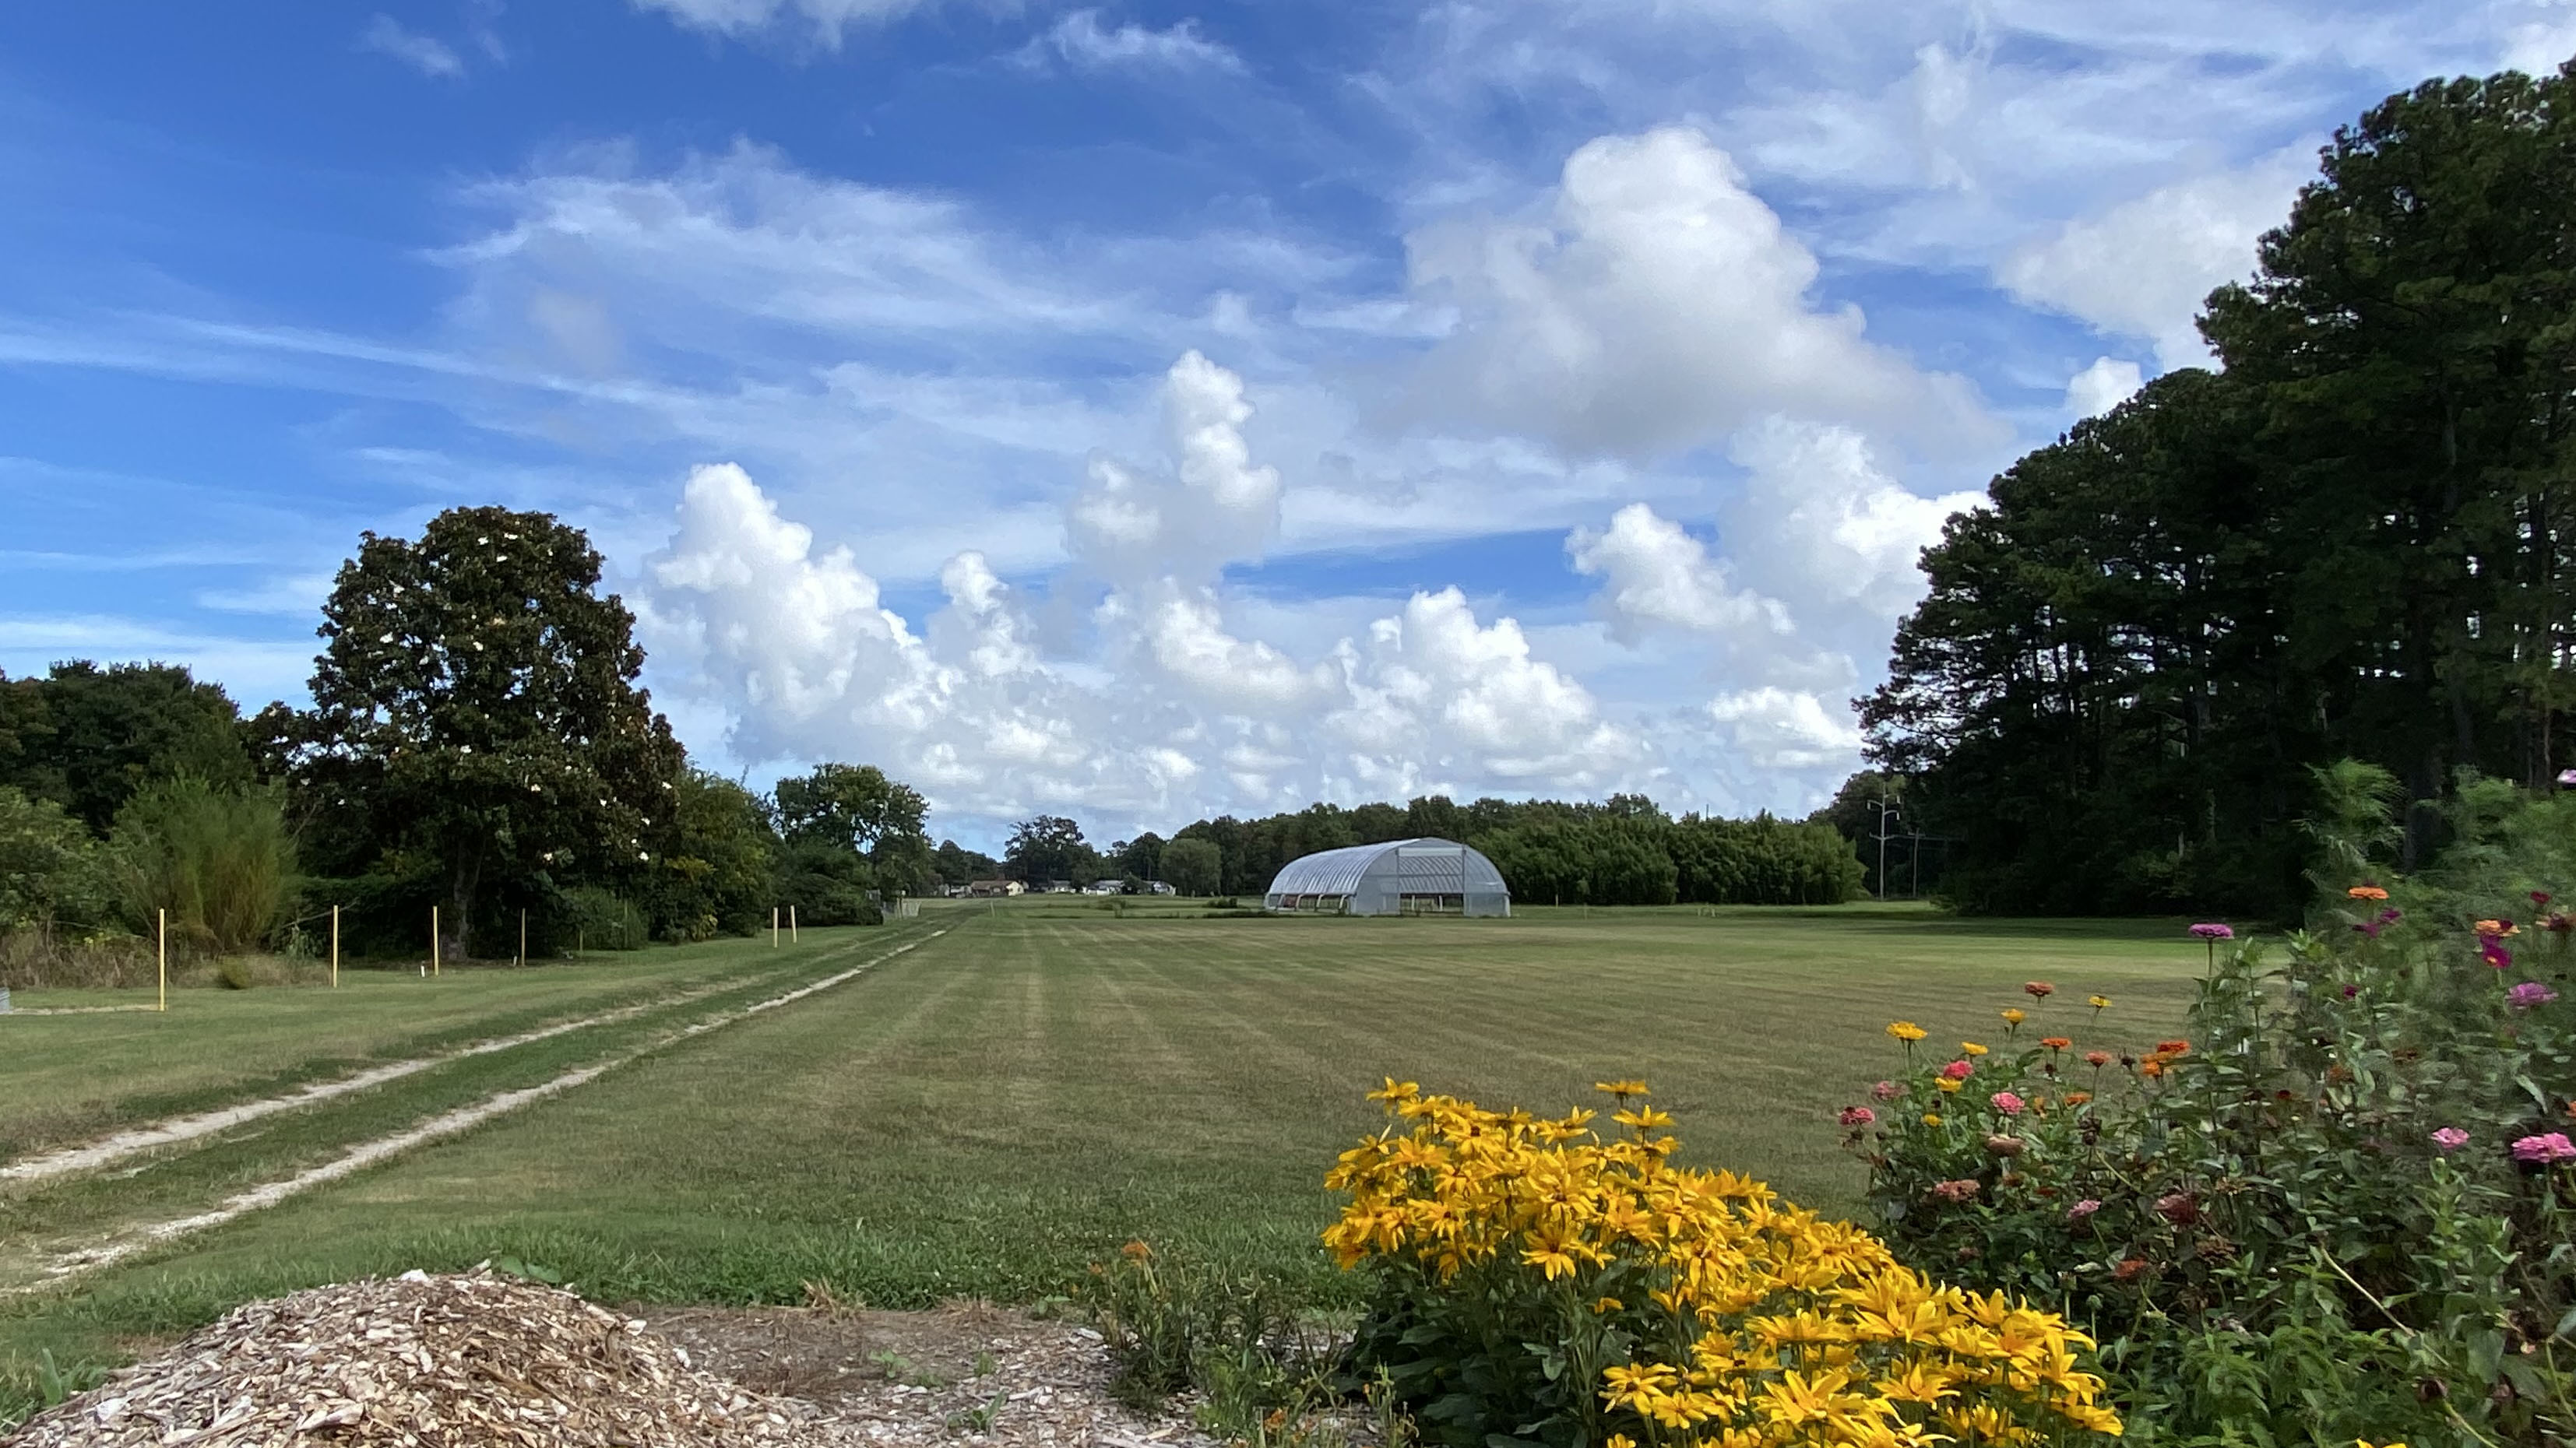 Testing fields at the Hampton Roads Agricultural Research and Extension Center in Virginia Beach in August 2022, with a pollinator garden in the foreground.